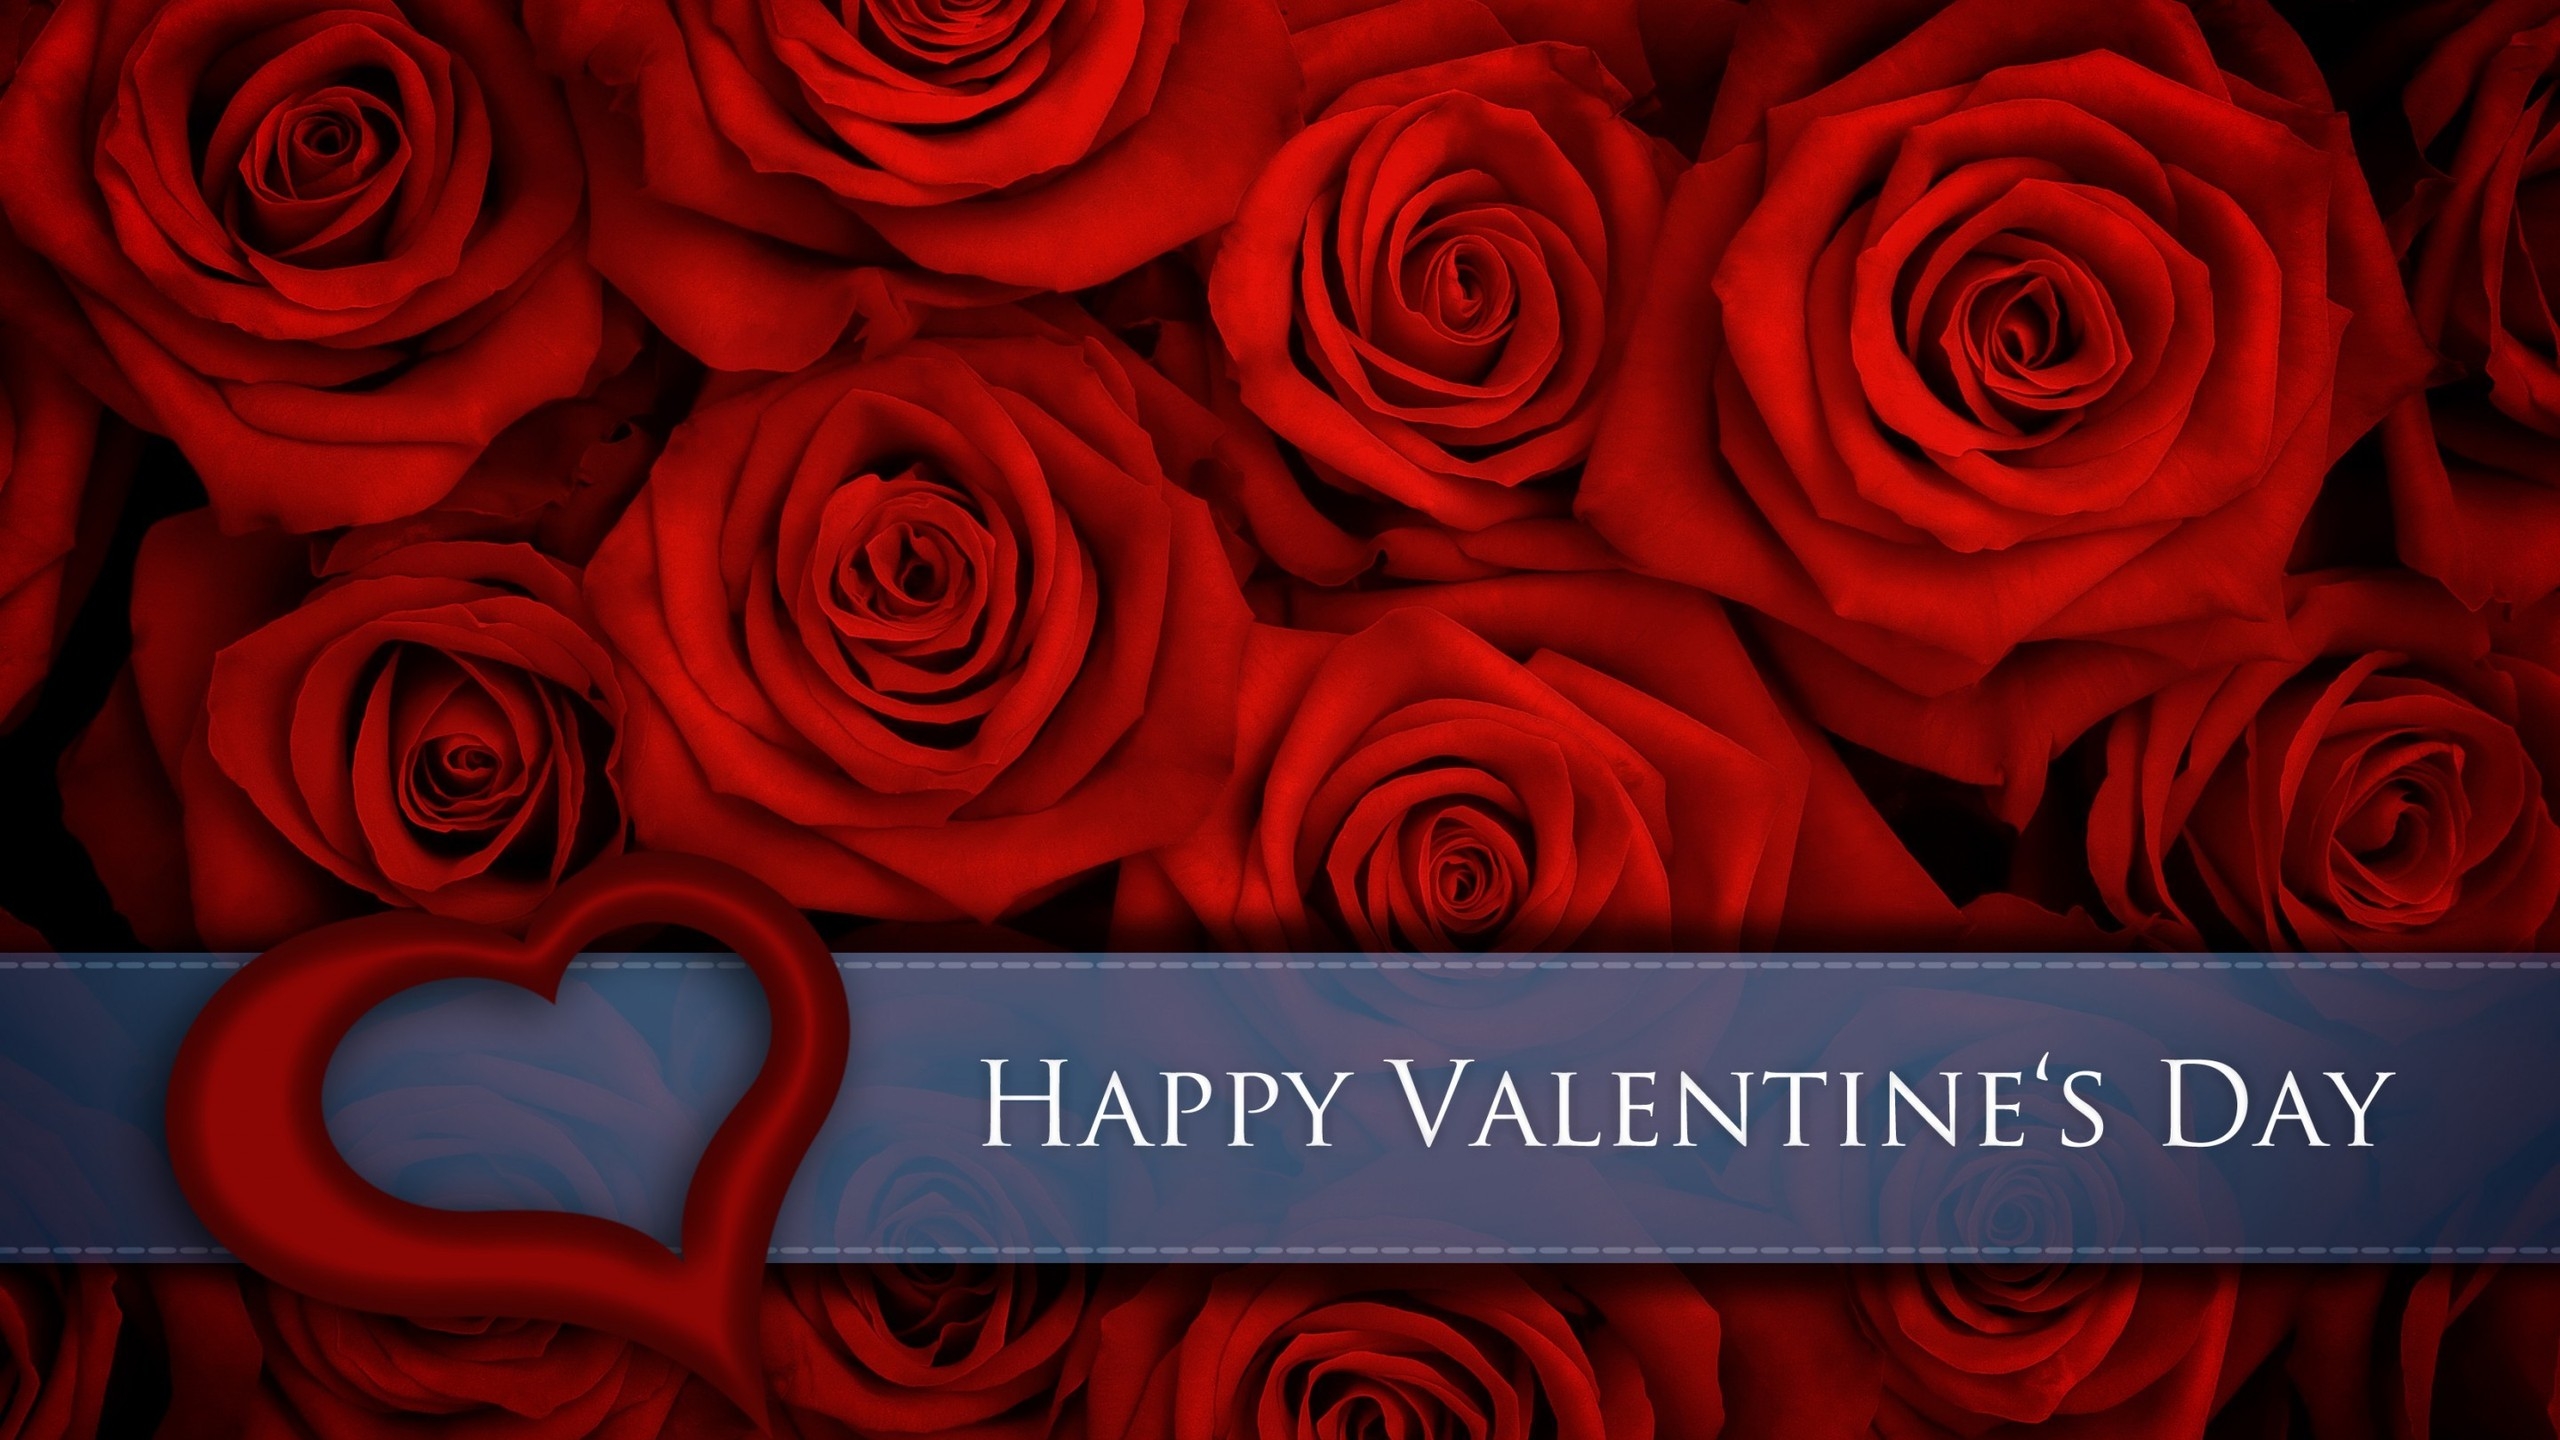 Red Roses for Valentines Day for 2560x1440 HDTV resolution